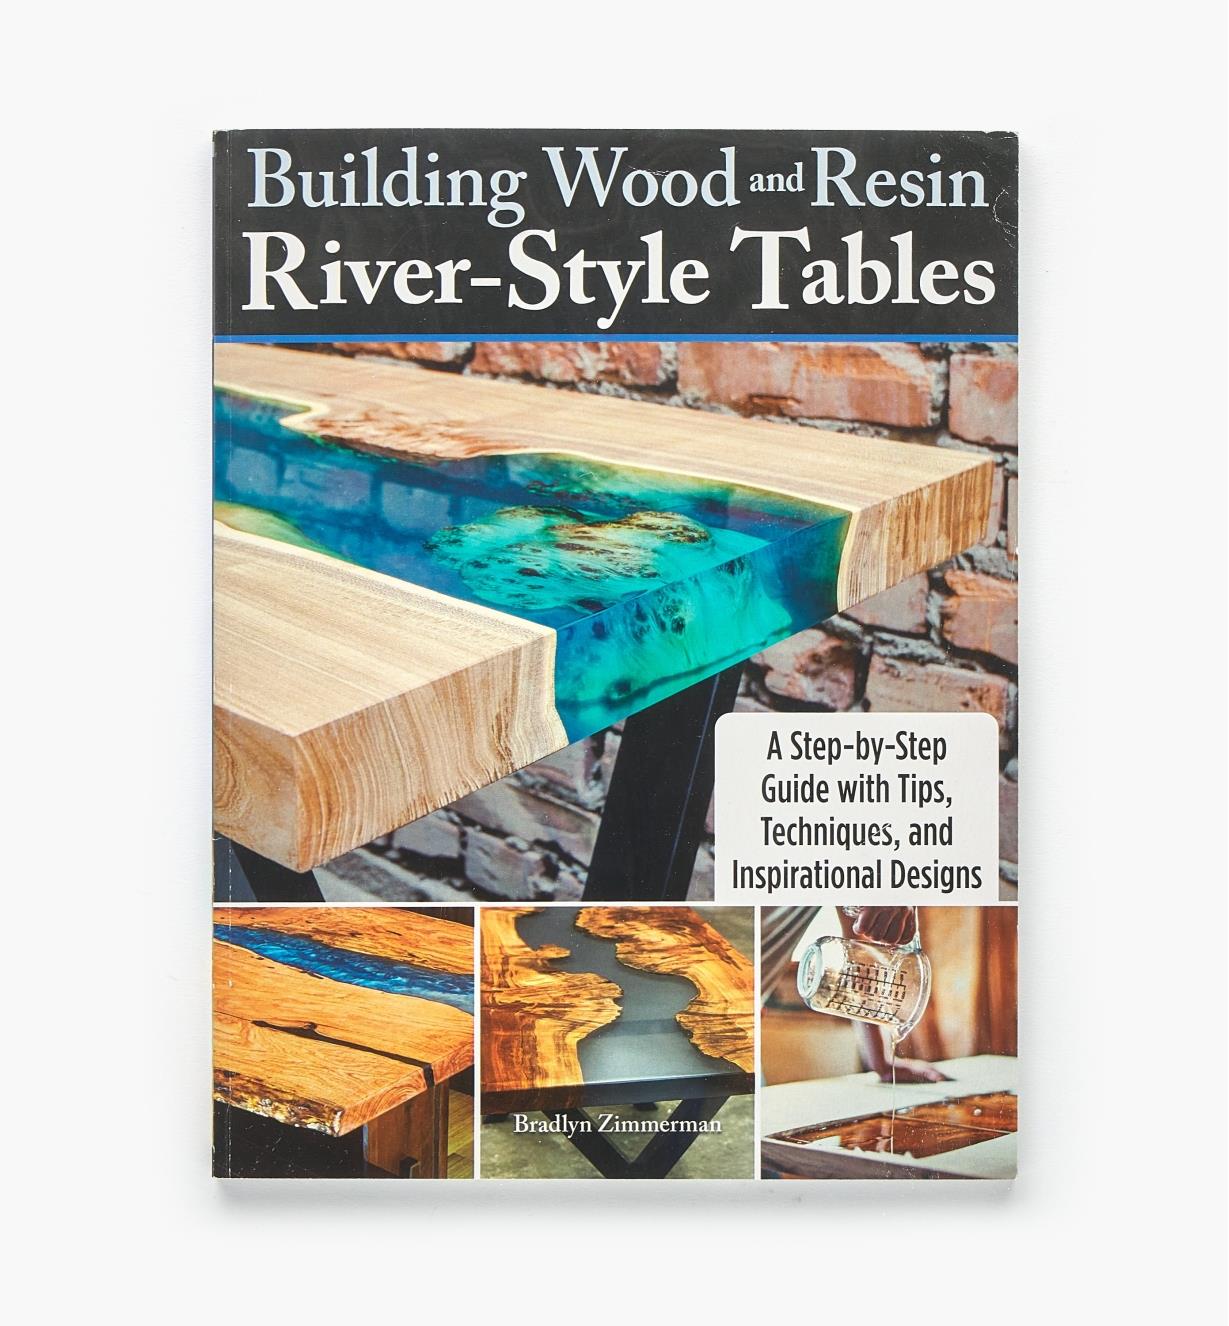 21L0112 - Building Wood and Resin River-Style Tables